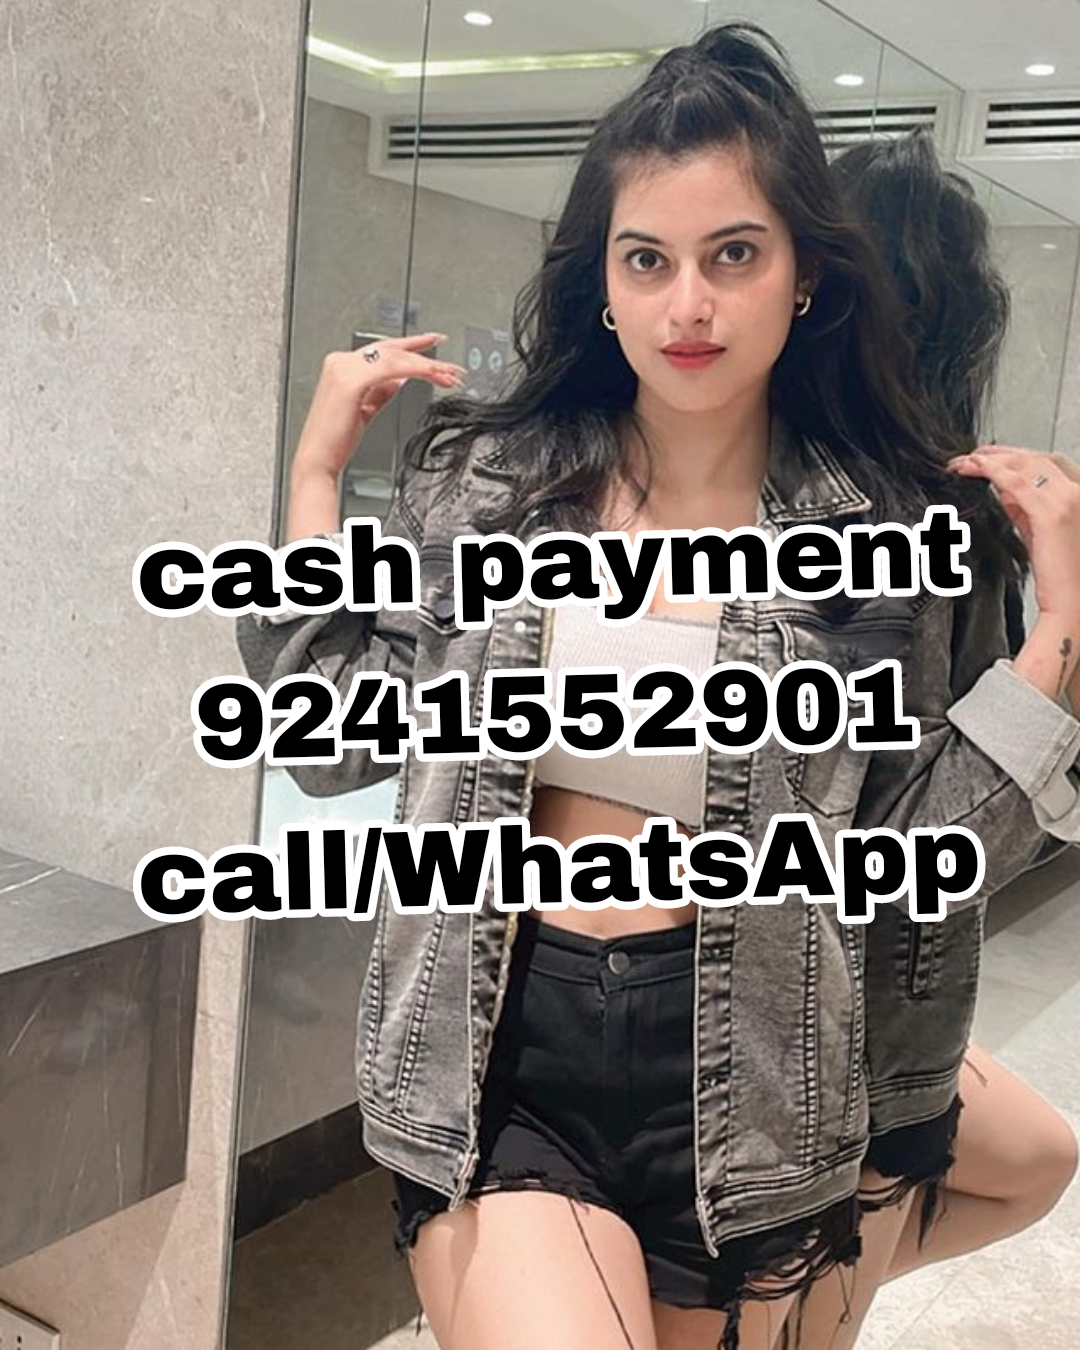 AHMEDNAGAR IN VIP CALL GIRL FULL TRUSTED GENUINE SERVICE AVAILABLE 